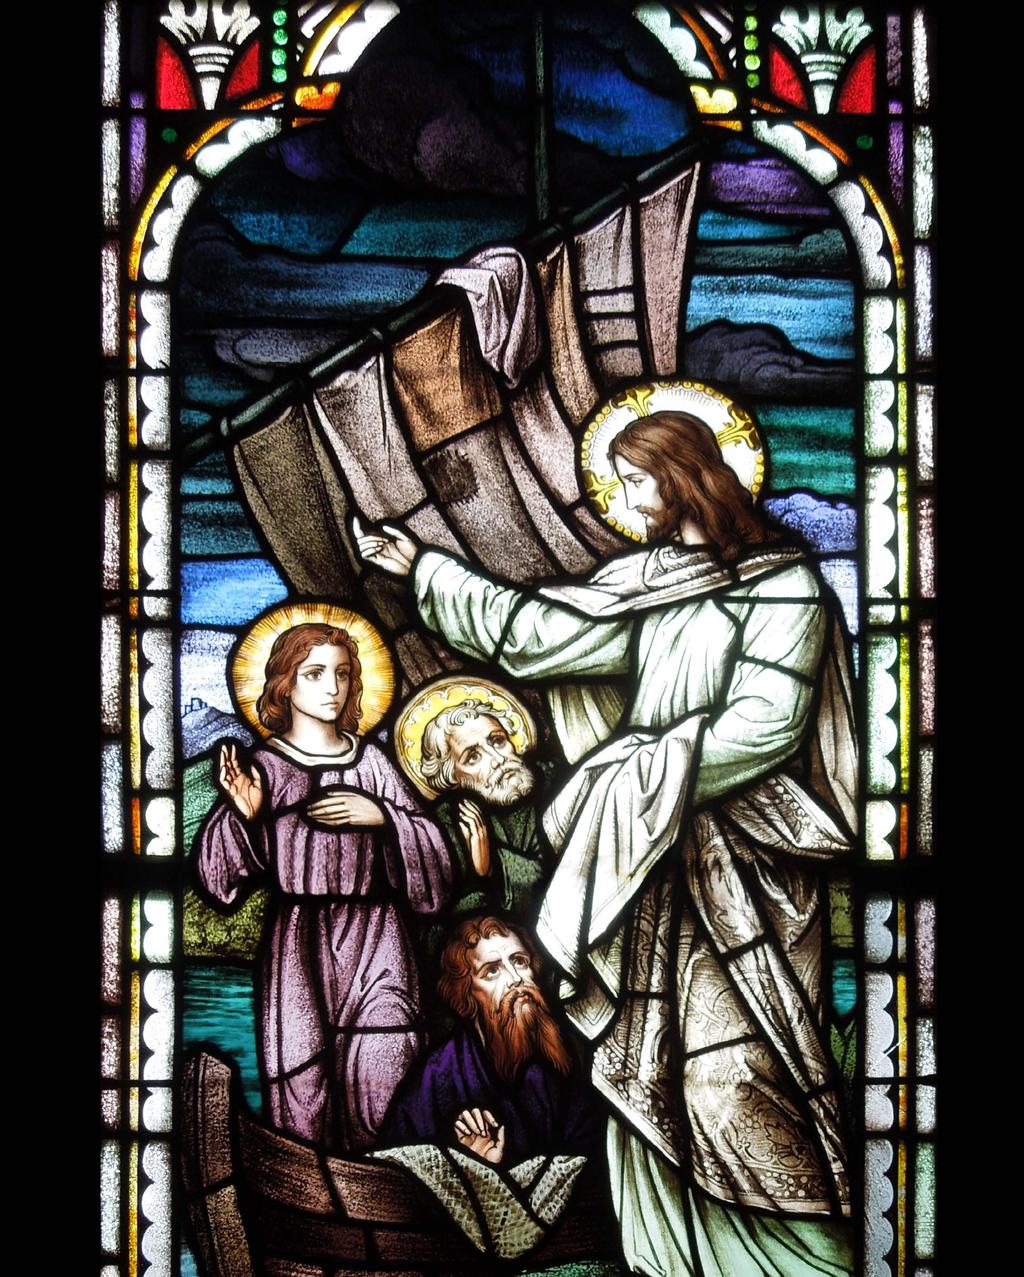 Buyers Guide to Stained Glass for Holiness Churches The Holiness Church in the United States is rooted in the works of John Wesley, and grew from the Holiness movement in the early 1900s.